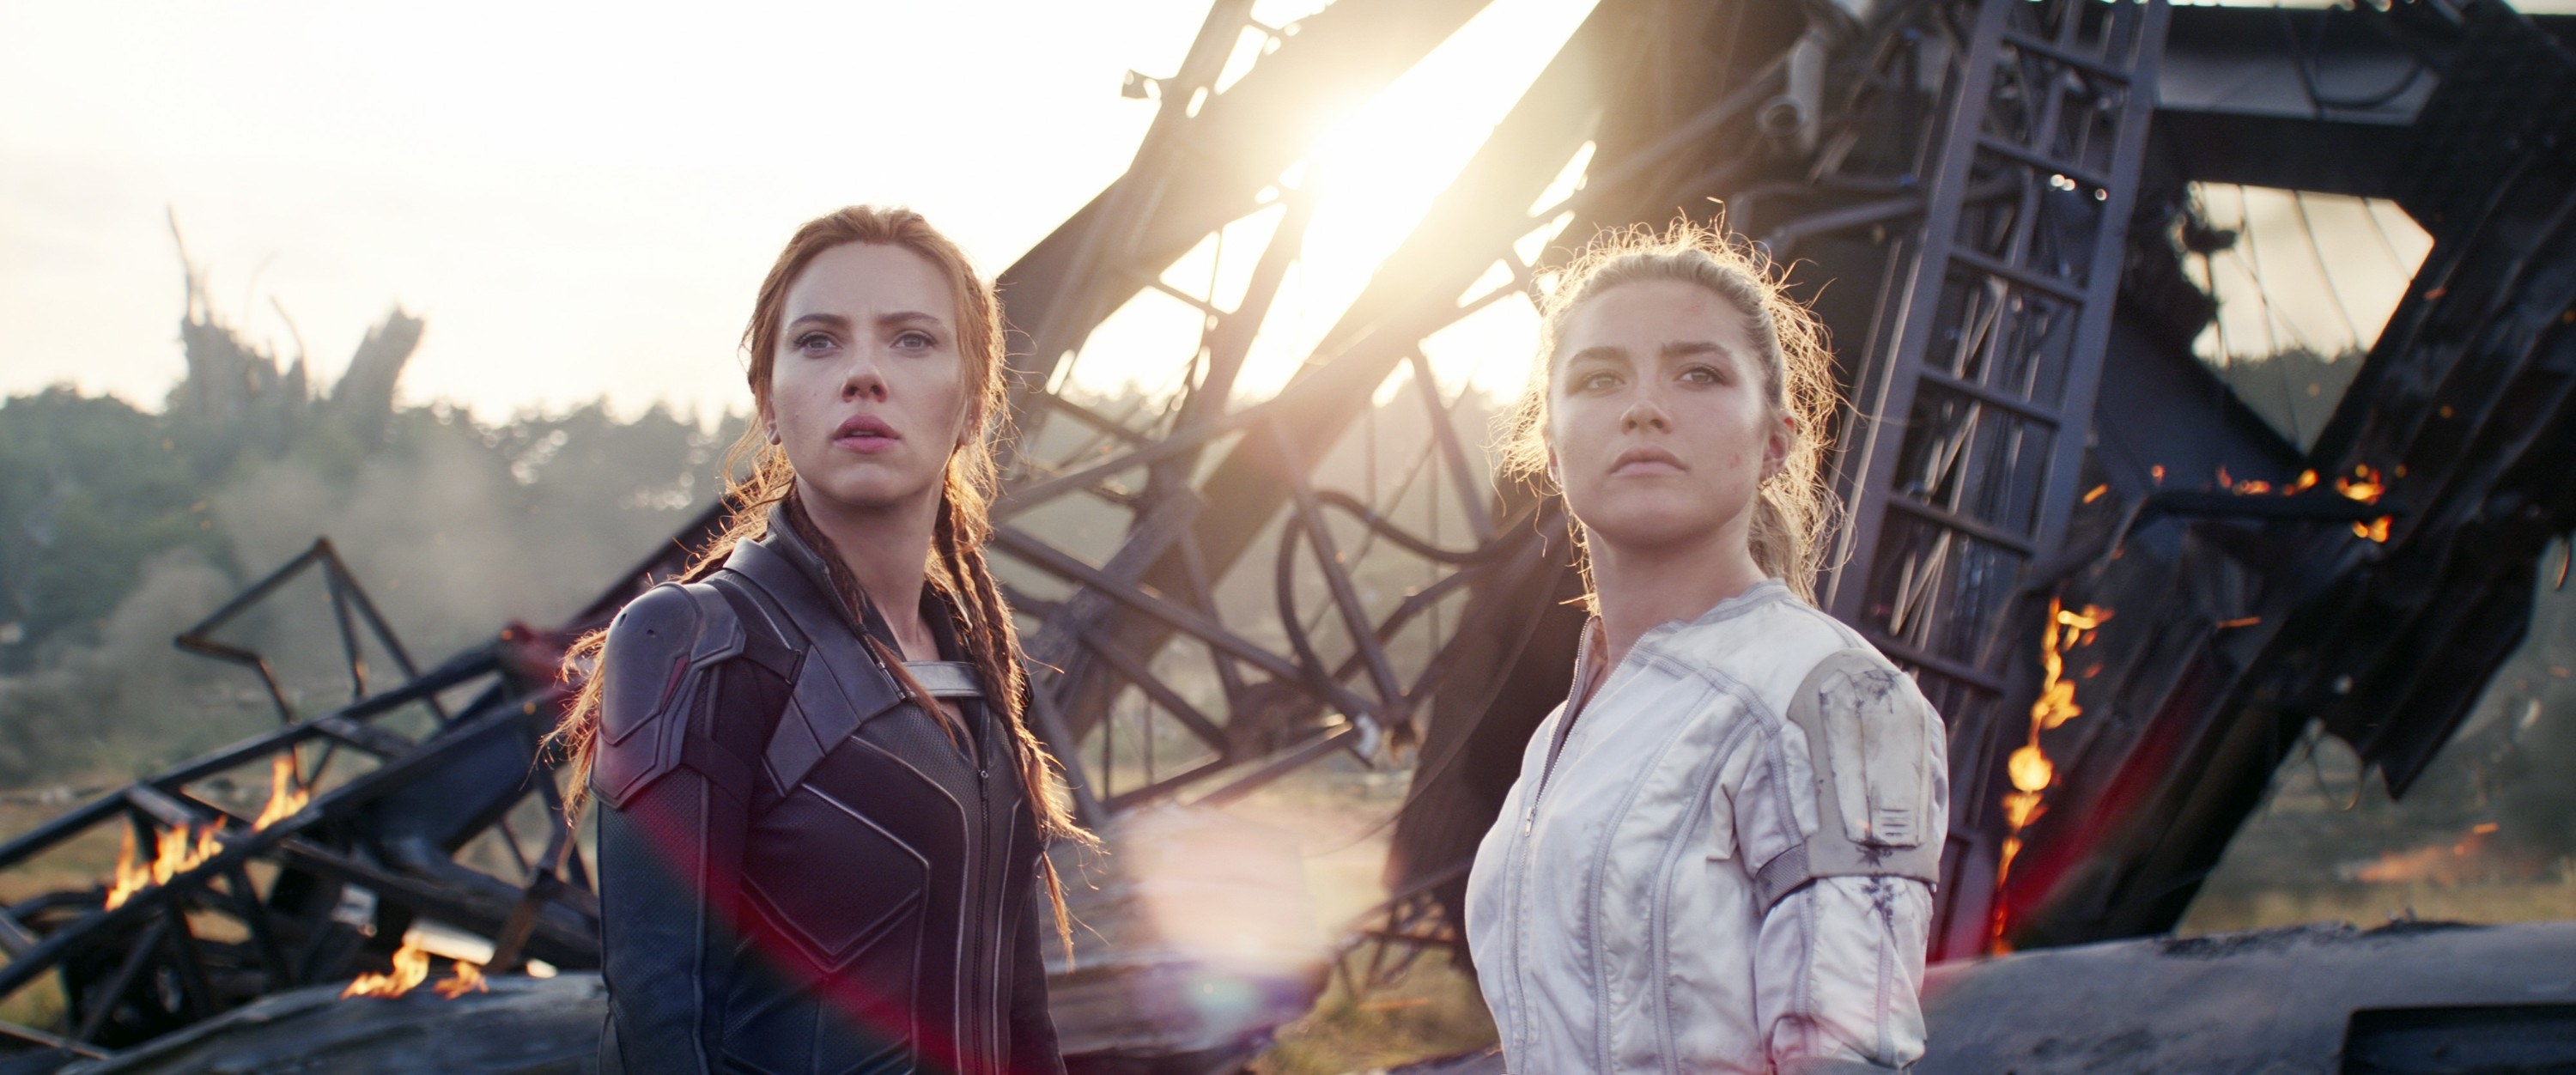 Scarlett Johansson and Florence Pugh stand beside some wreckage